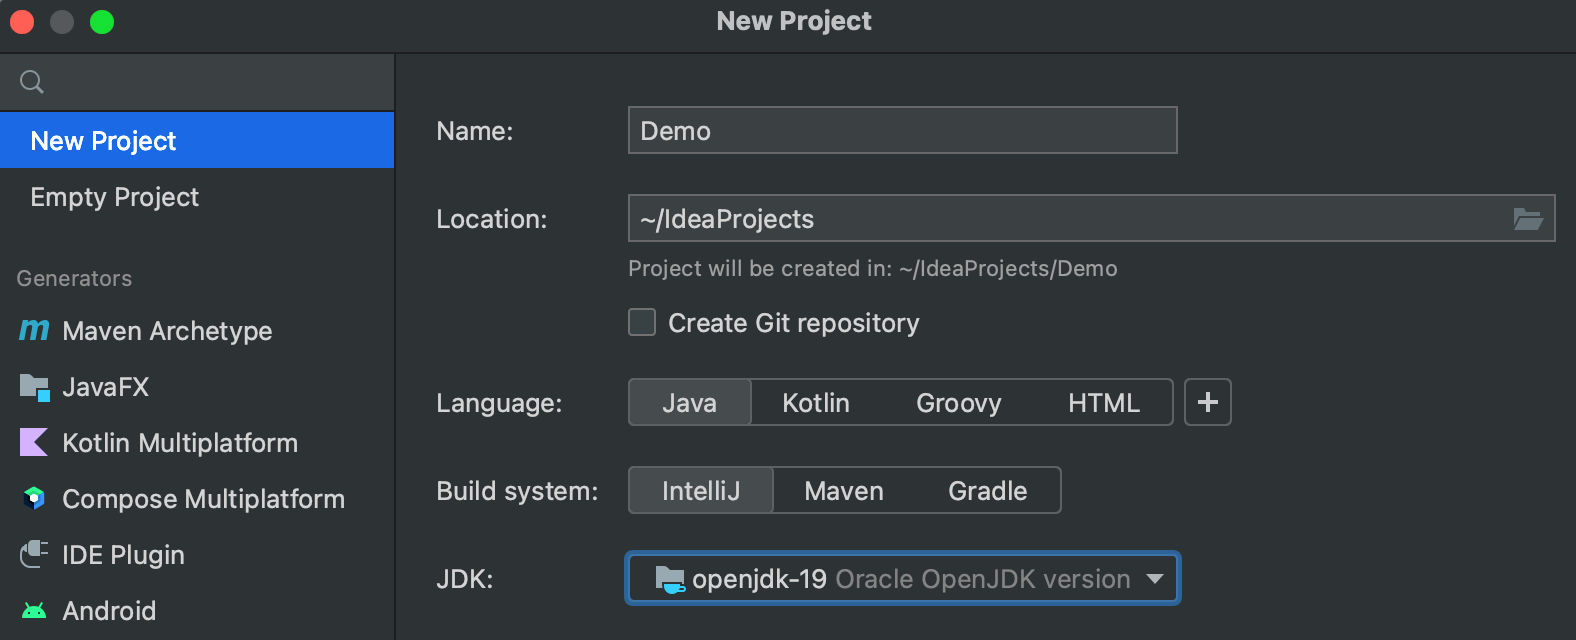 IntelliJ. Select Java in Language, and IntelliJ in Build system